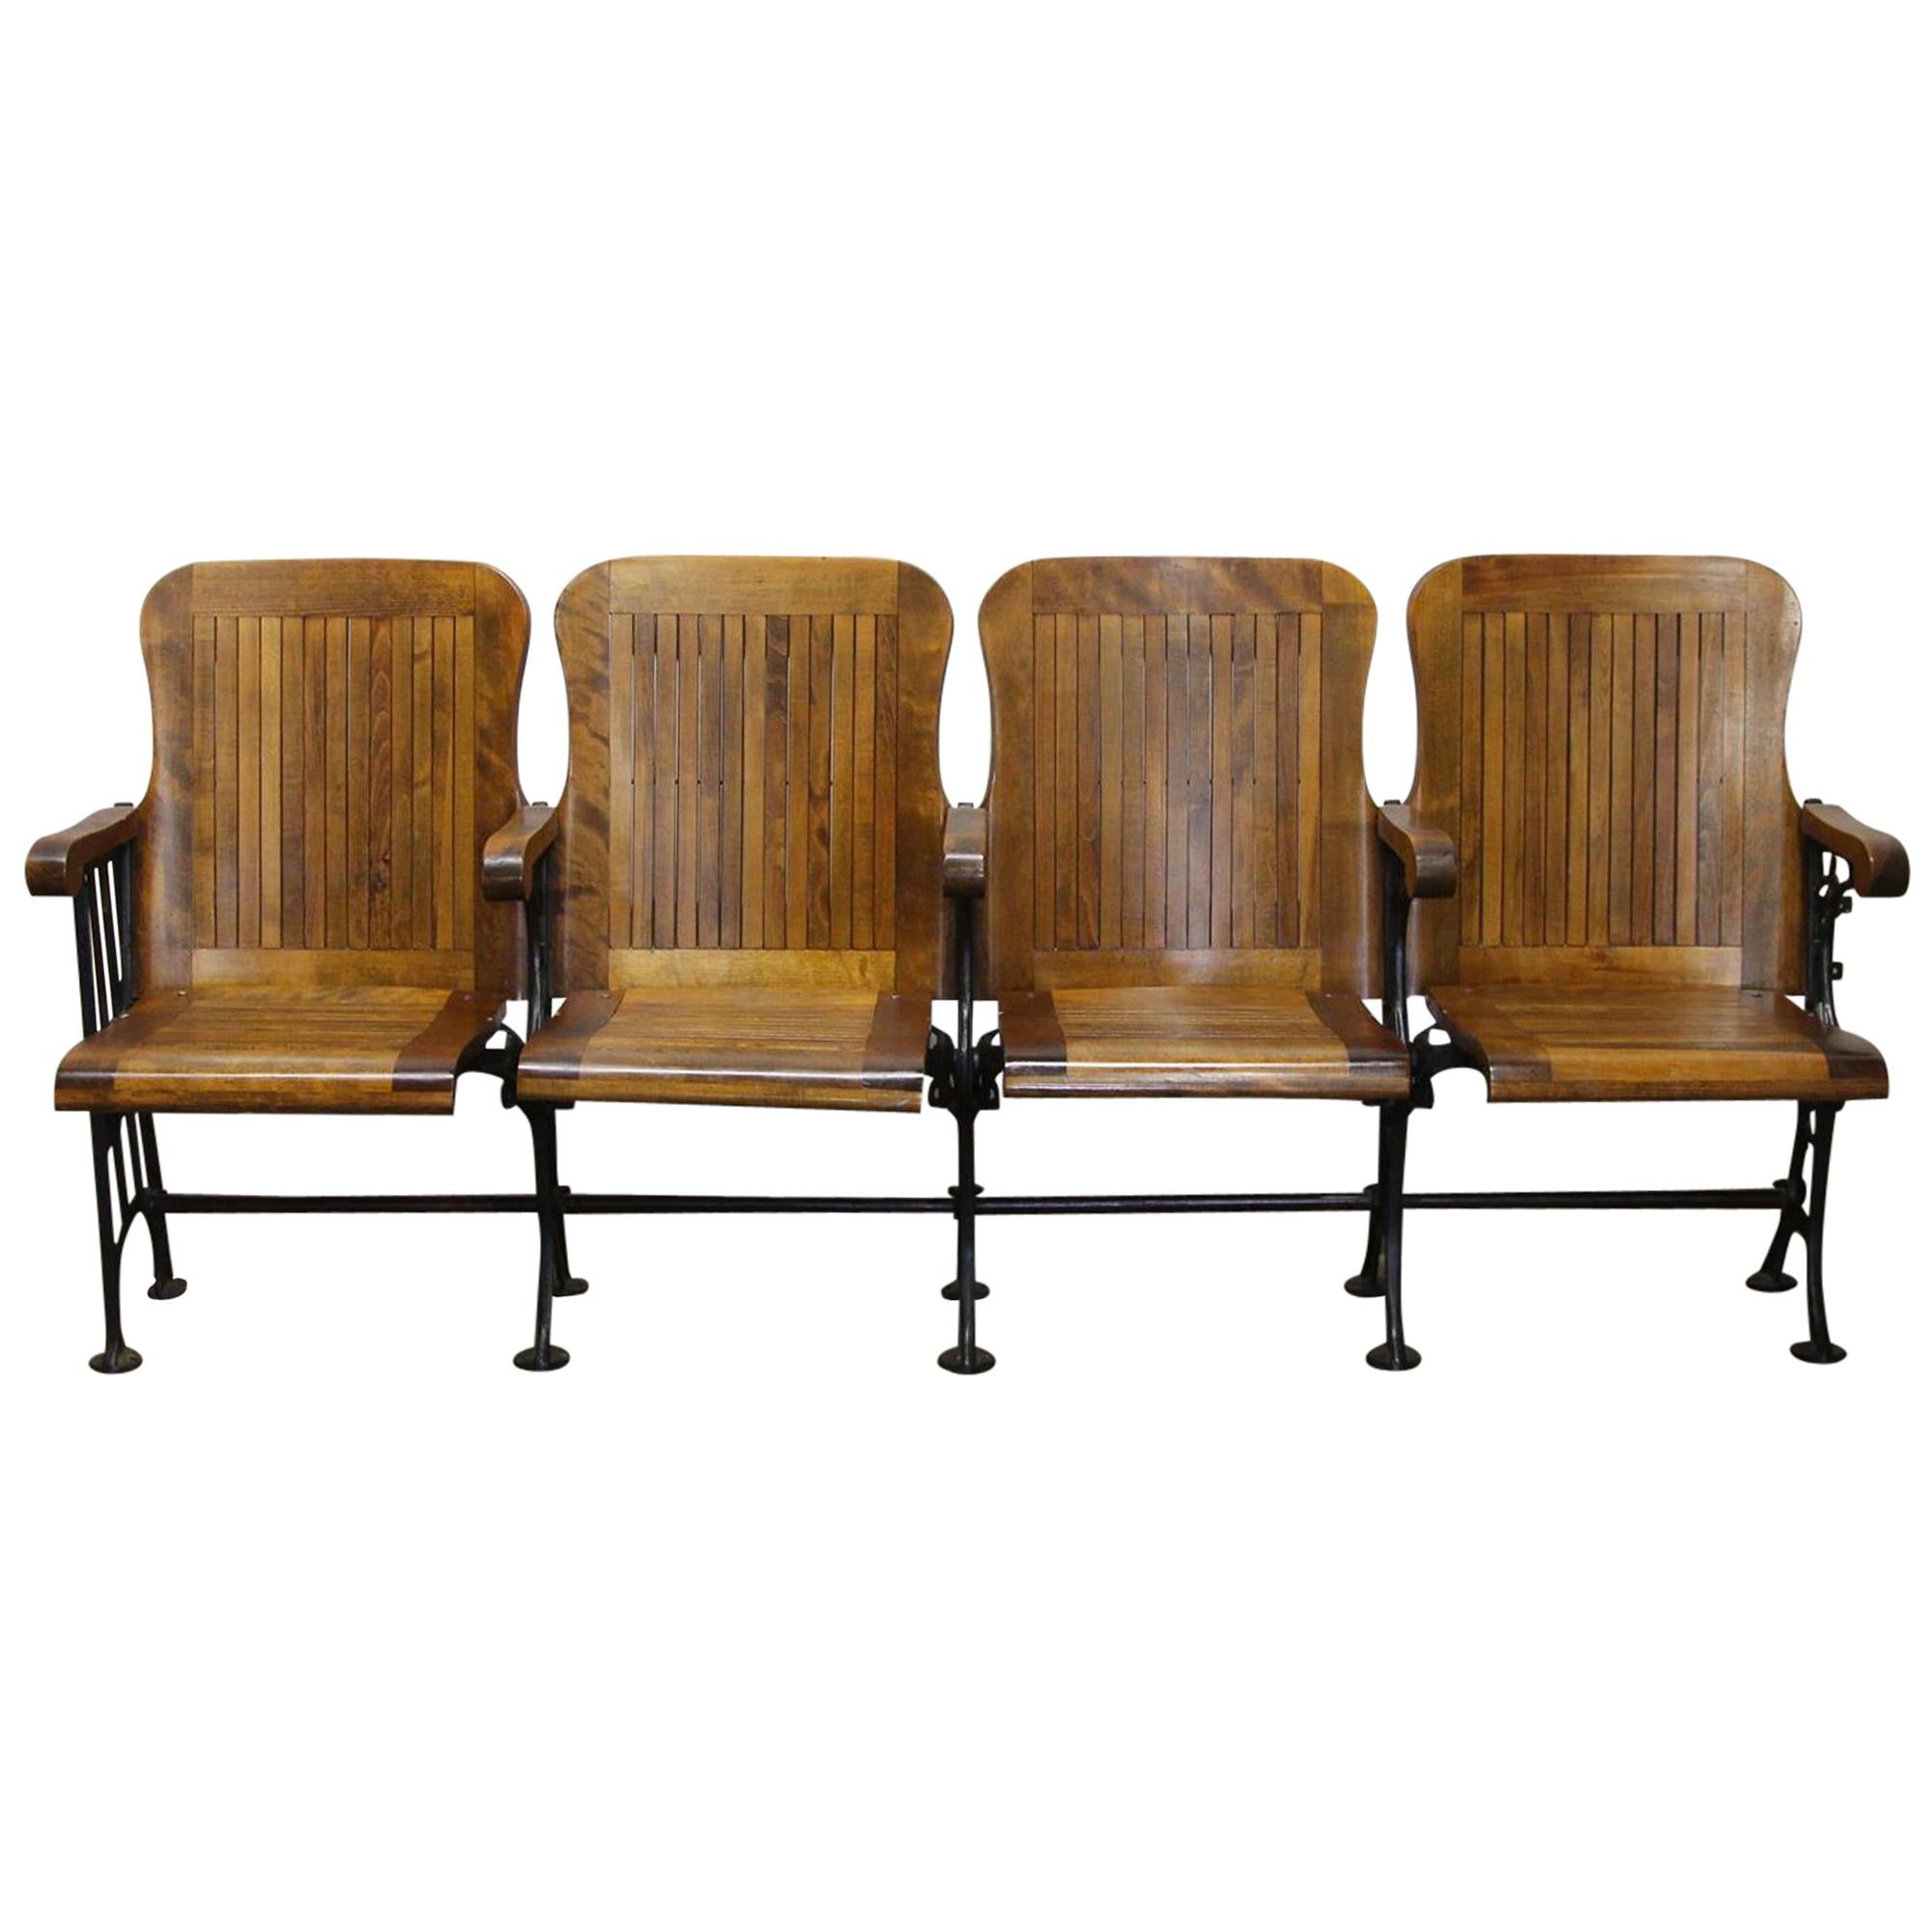 1905 Four Seat Folding Theater Chairs with Cast Iron Frame from Brooklyn